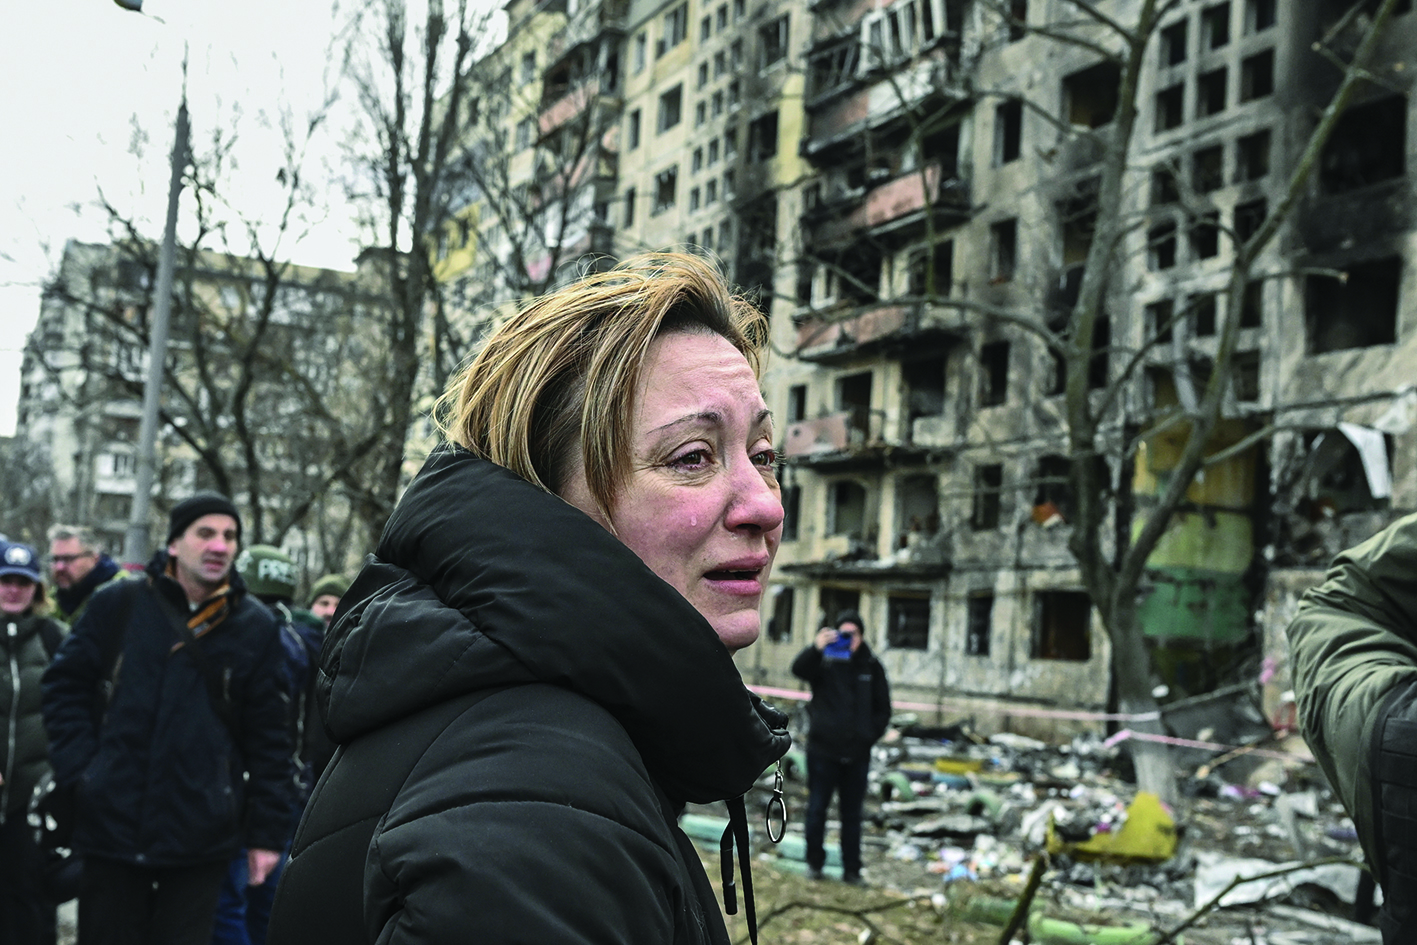 KYIV: A woman reacts as she stands outside destroyed apartment blocks following shelling in the northwestern Obolon district of Kyiv yesterday.-AFPnn